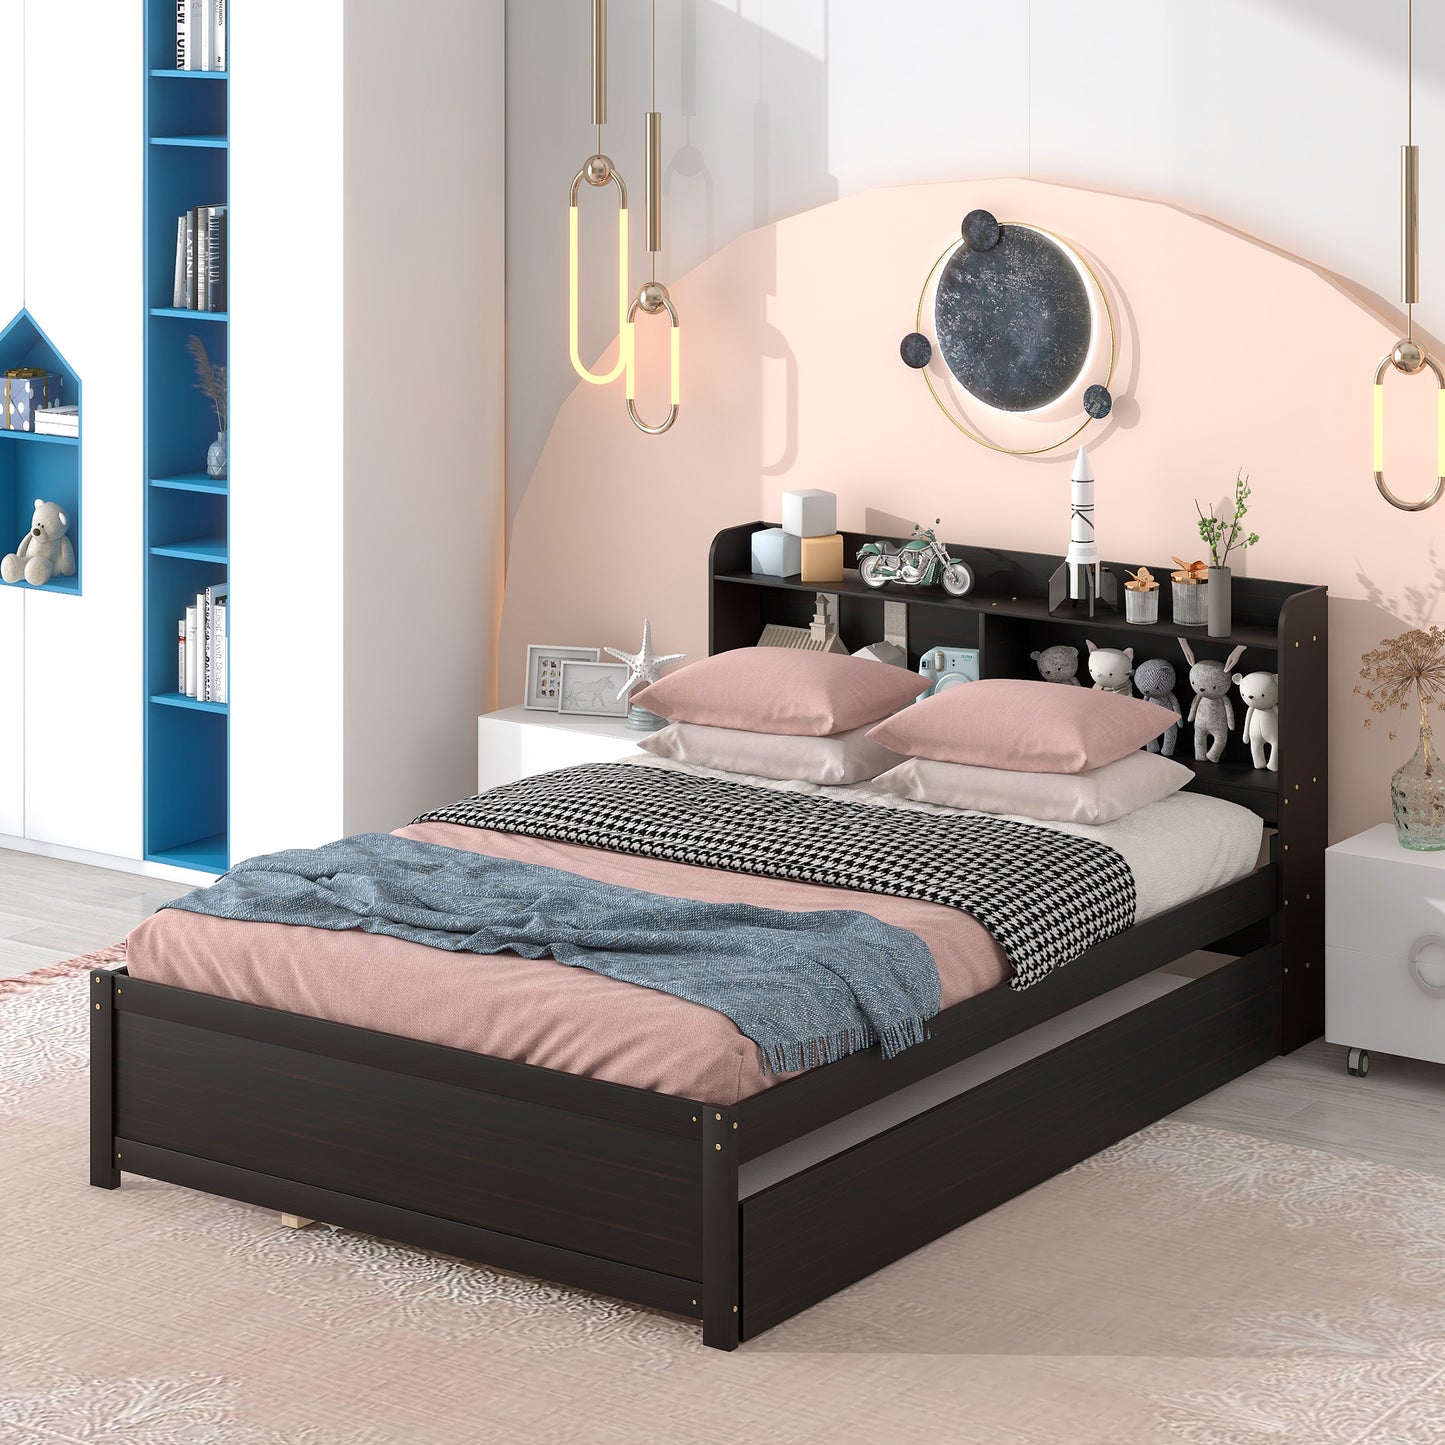 Full Platform Bed with Trundle, Bookcase, Espresso